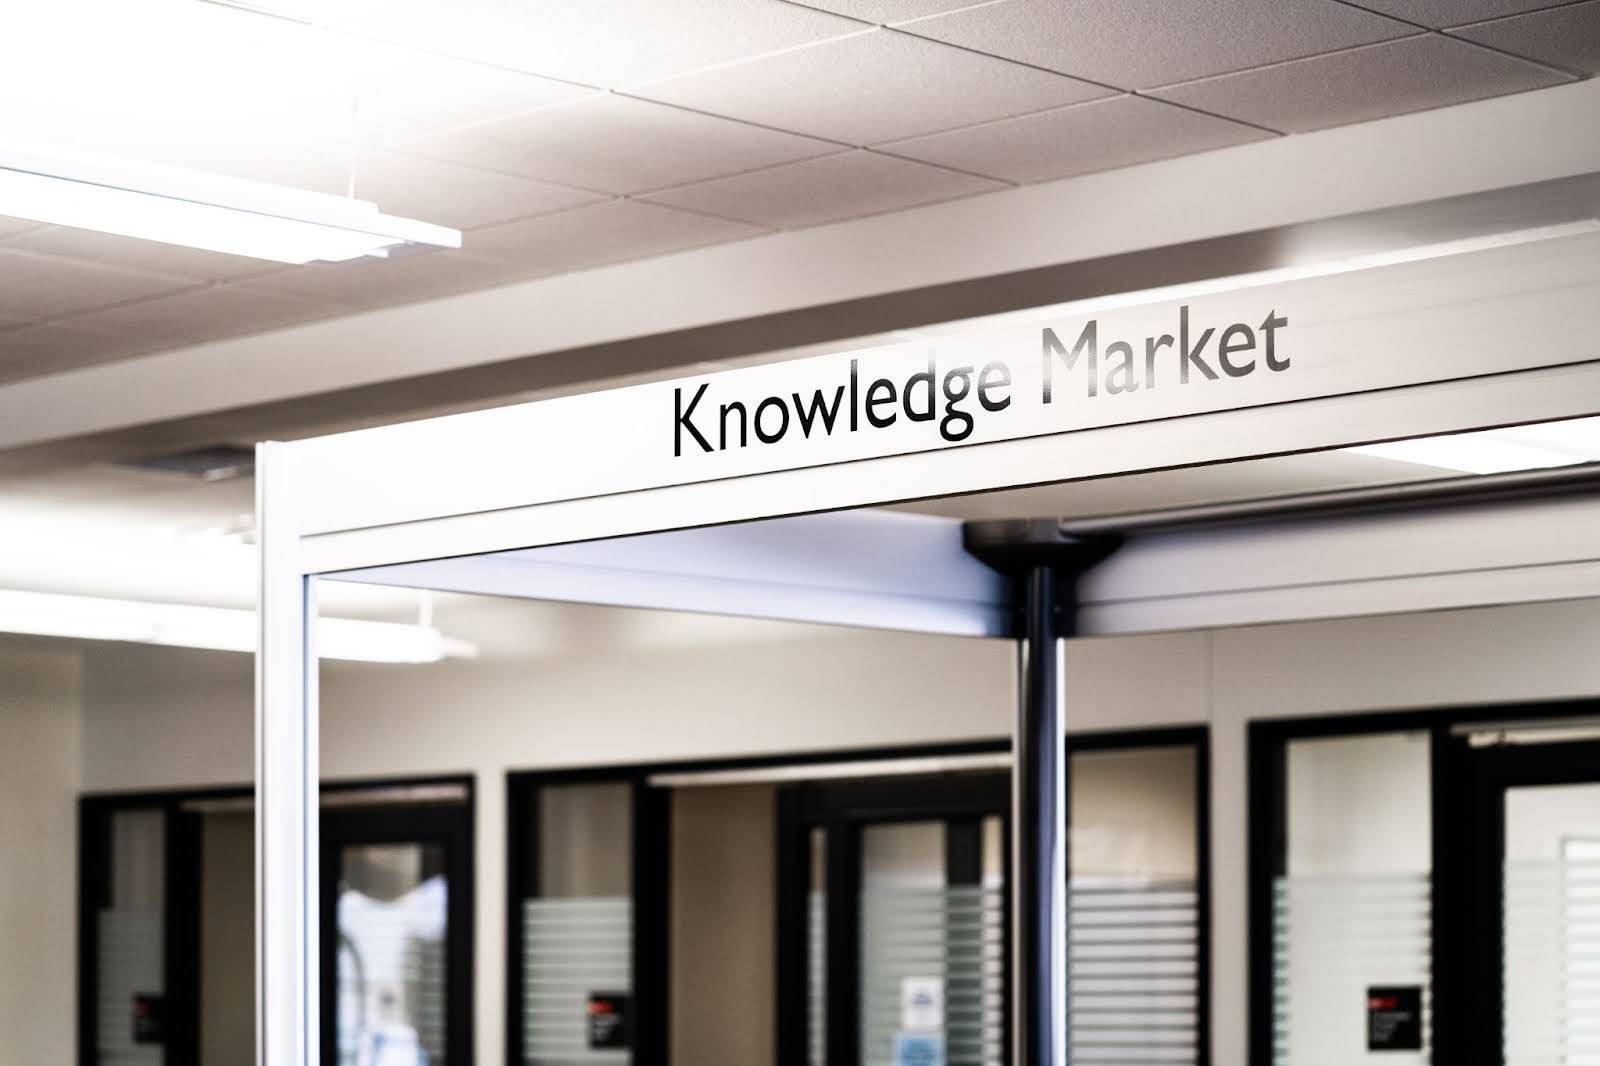 Knowledge Market space